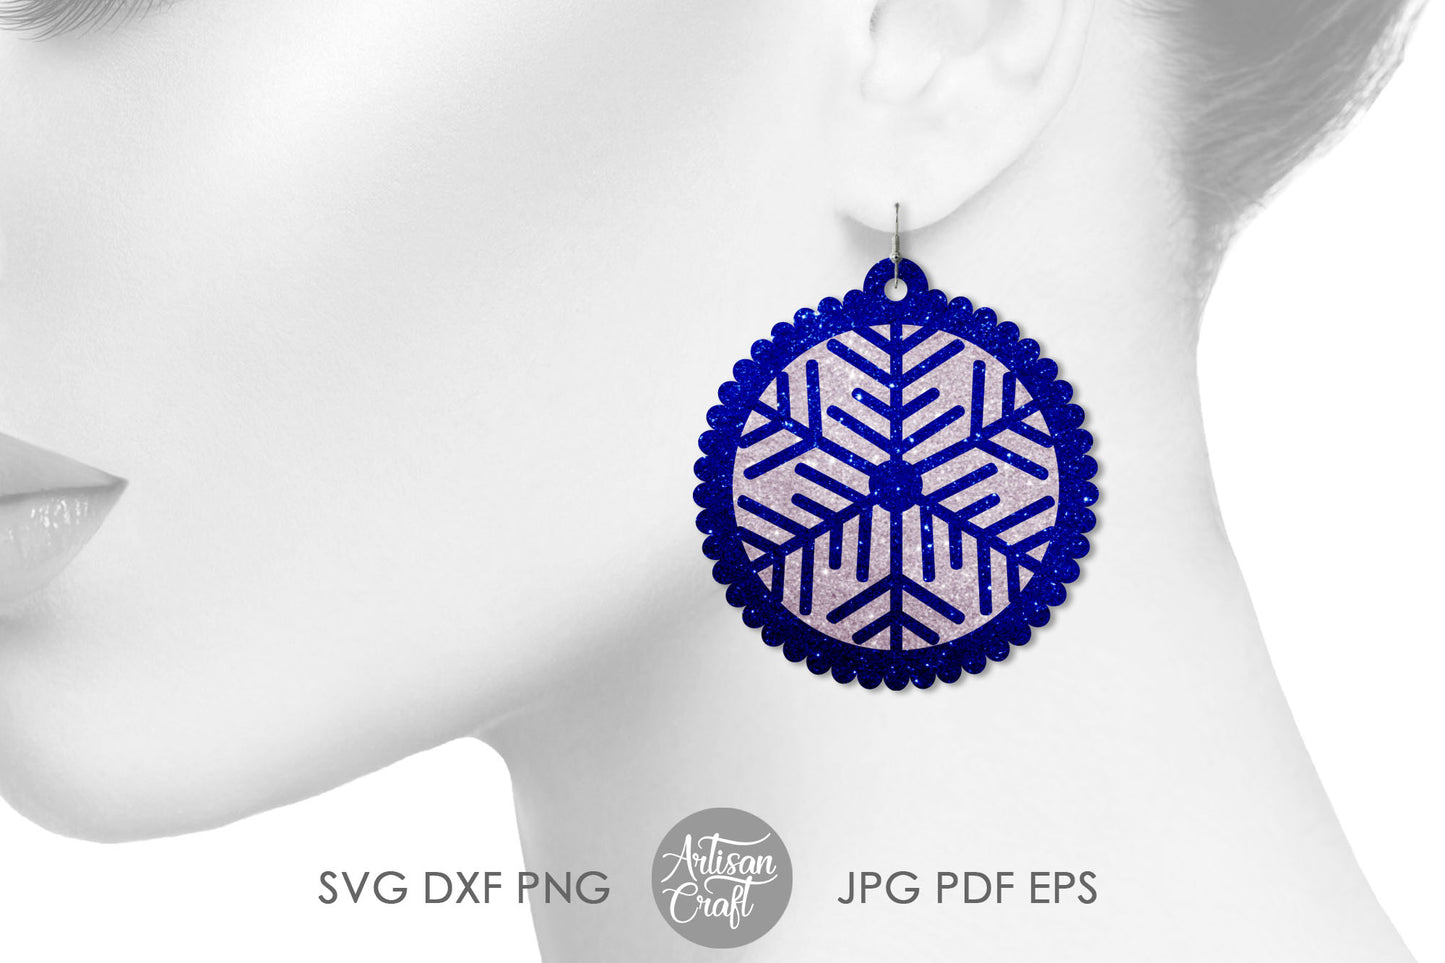 Snowflake earrings SVG making lase cut jewelry for Christmas